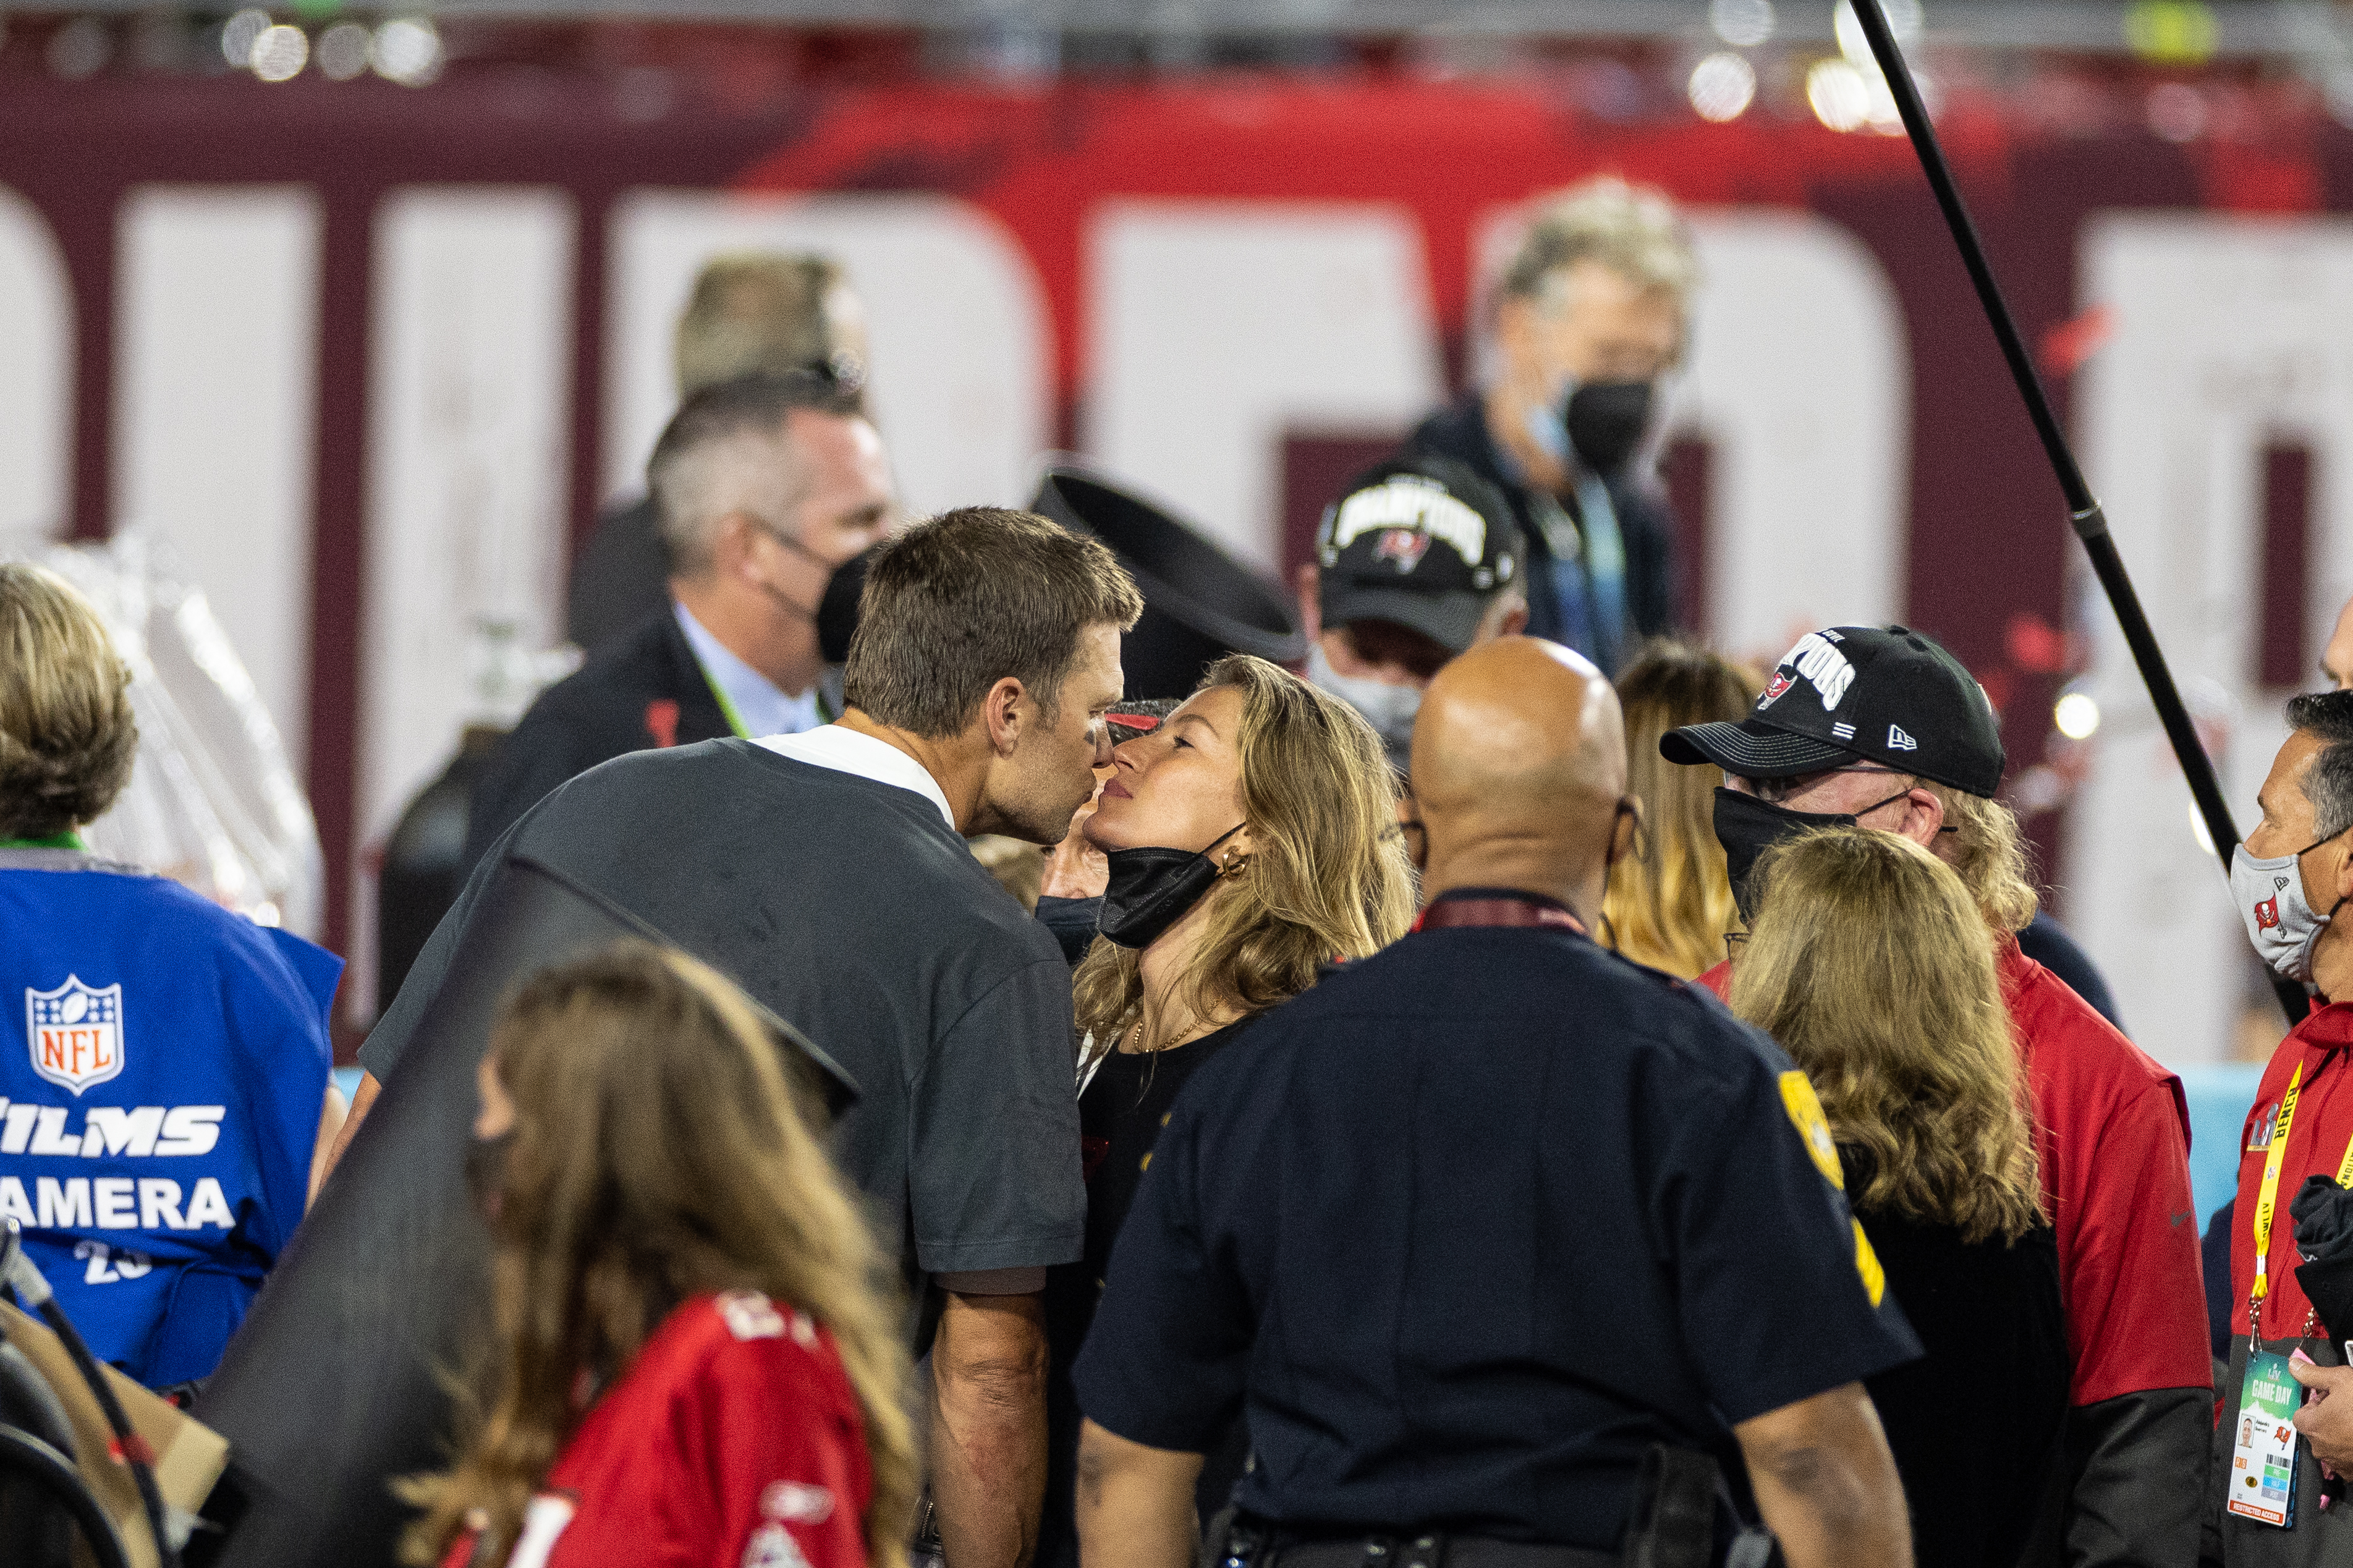 Tom and Gisele kissing on the football field after a game